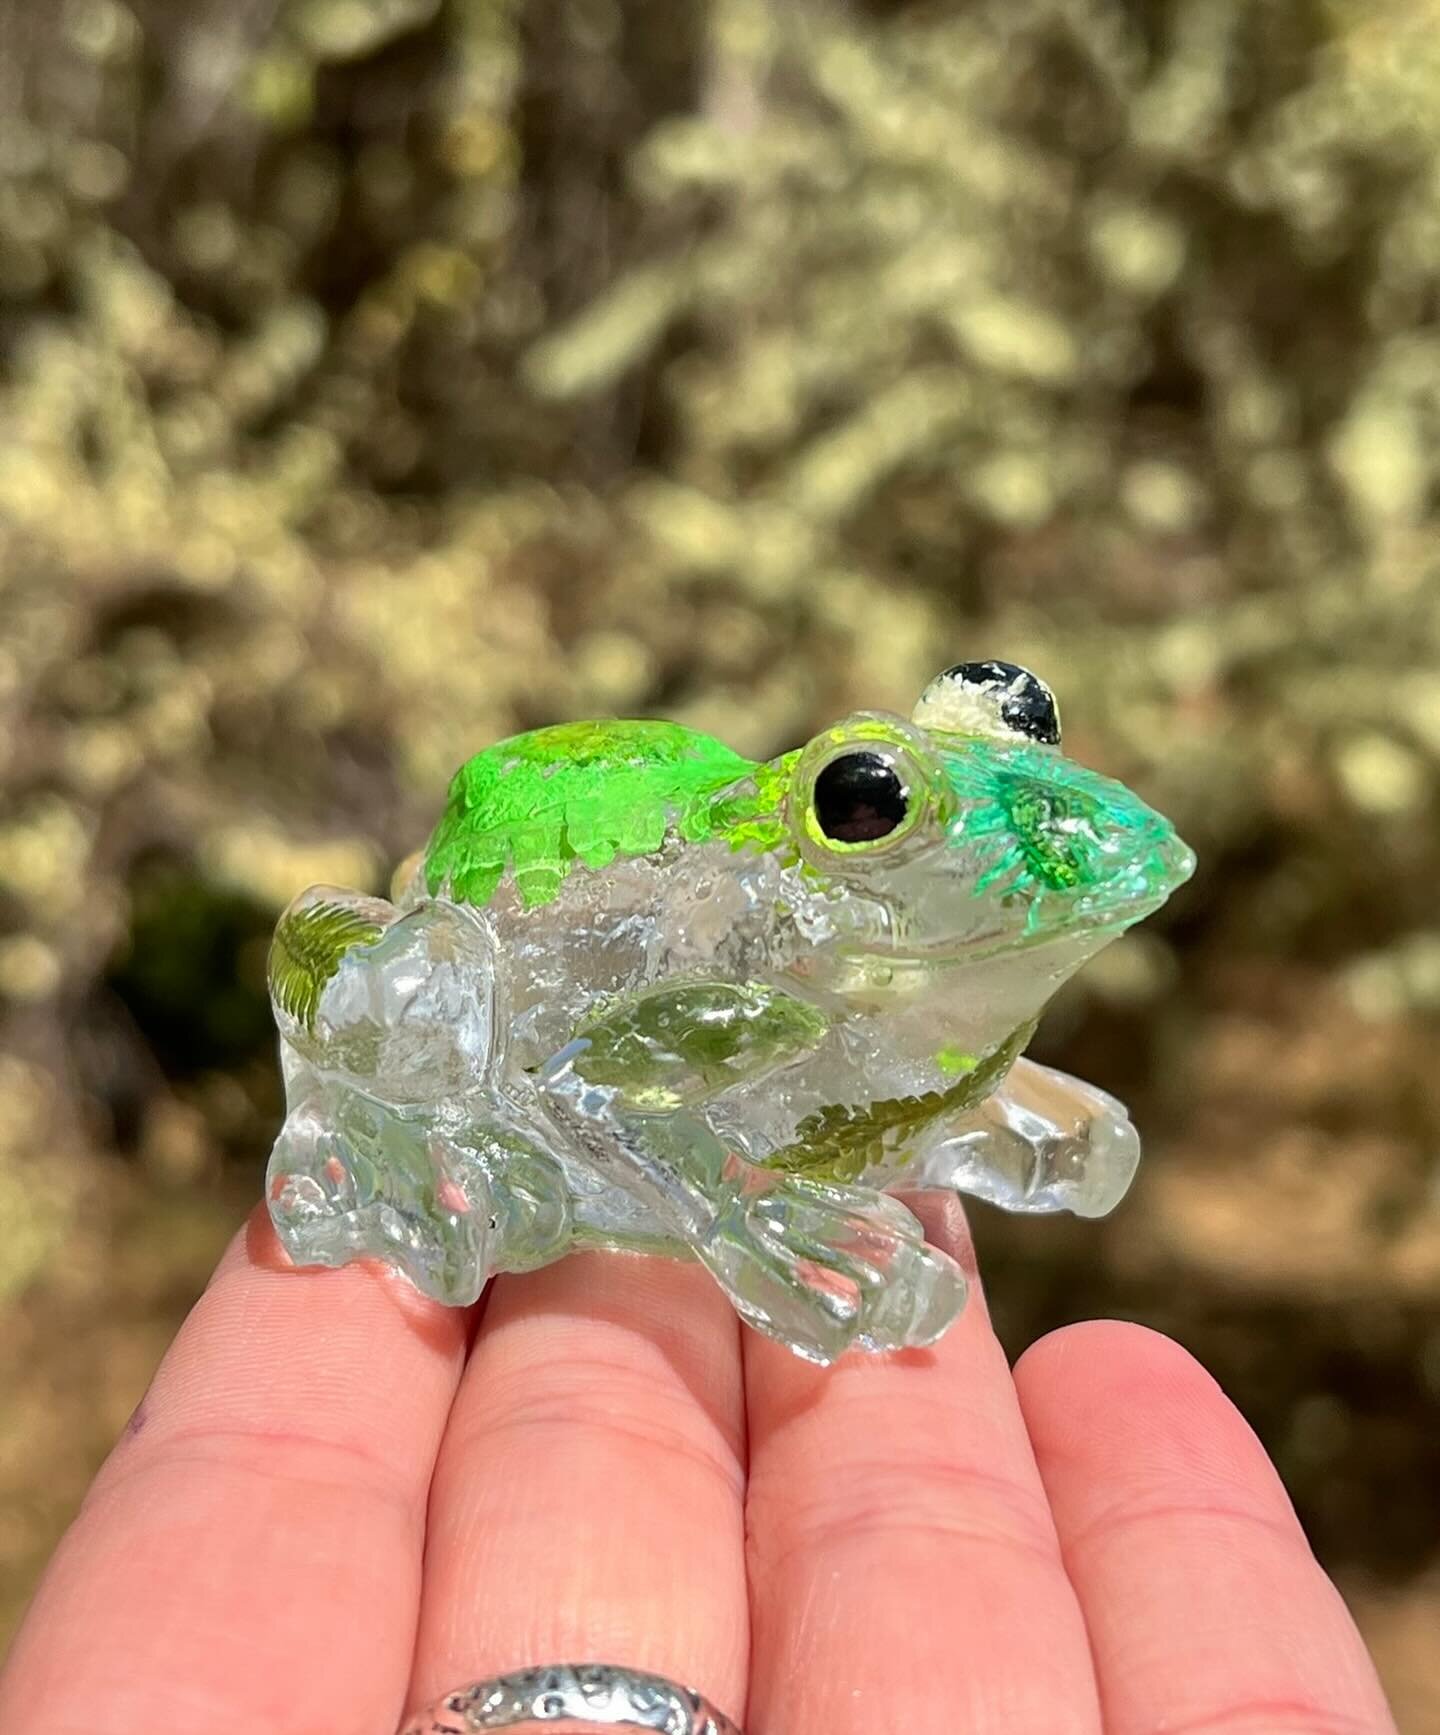 *Ribbit Ribbit* 🐸 It&rsquo;s World Frog Day!  Frog Day is an annual celebration dedicated to raising awareness about the significance of frogs and their vital role in the ecosystem. 💚🌎 

#frogs #frogcore #frogart #ribbitribbit #froggie #frogsofins